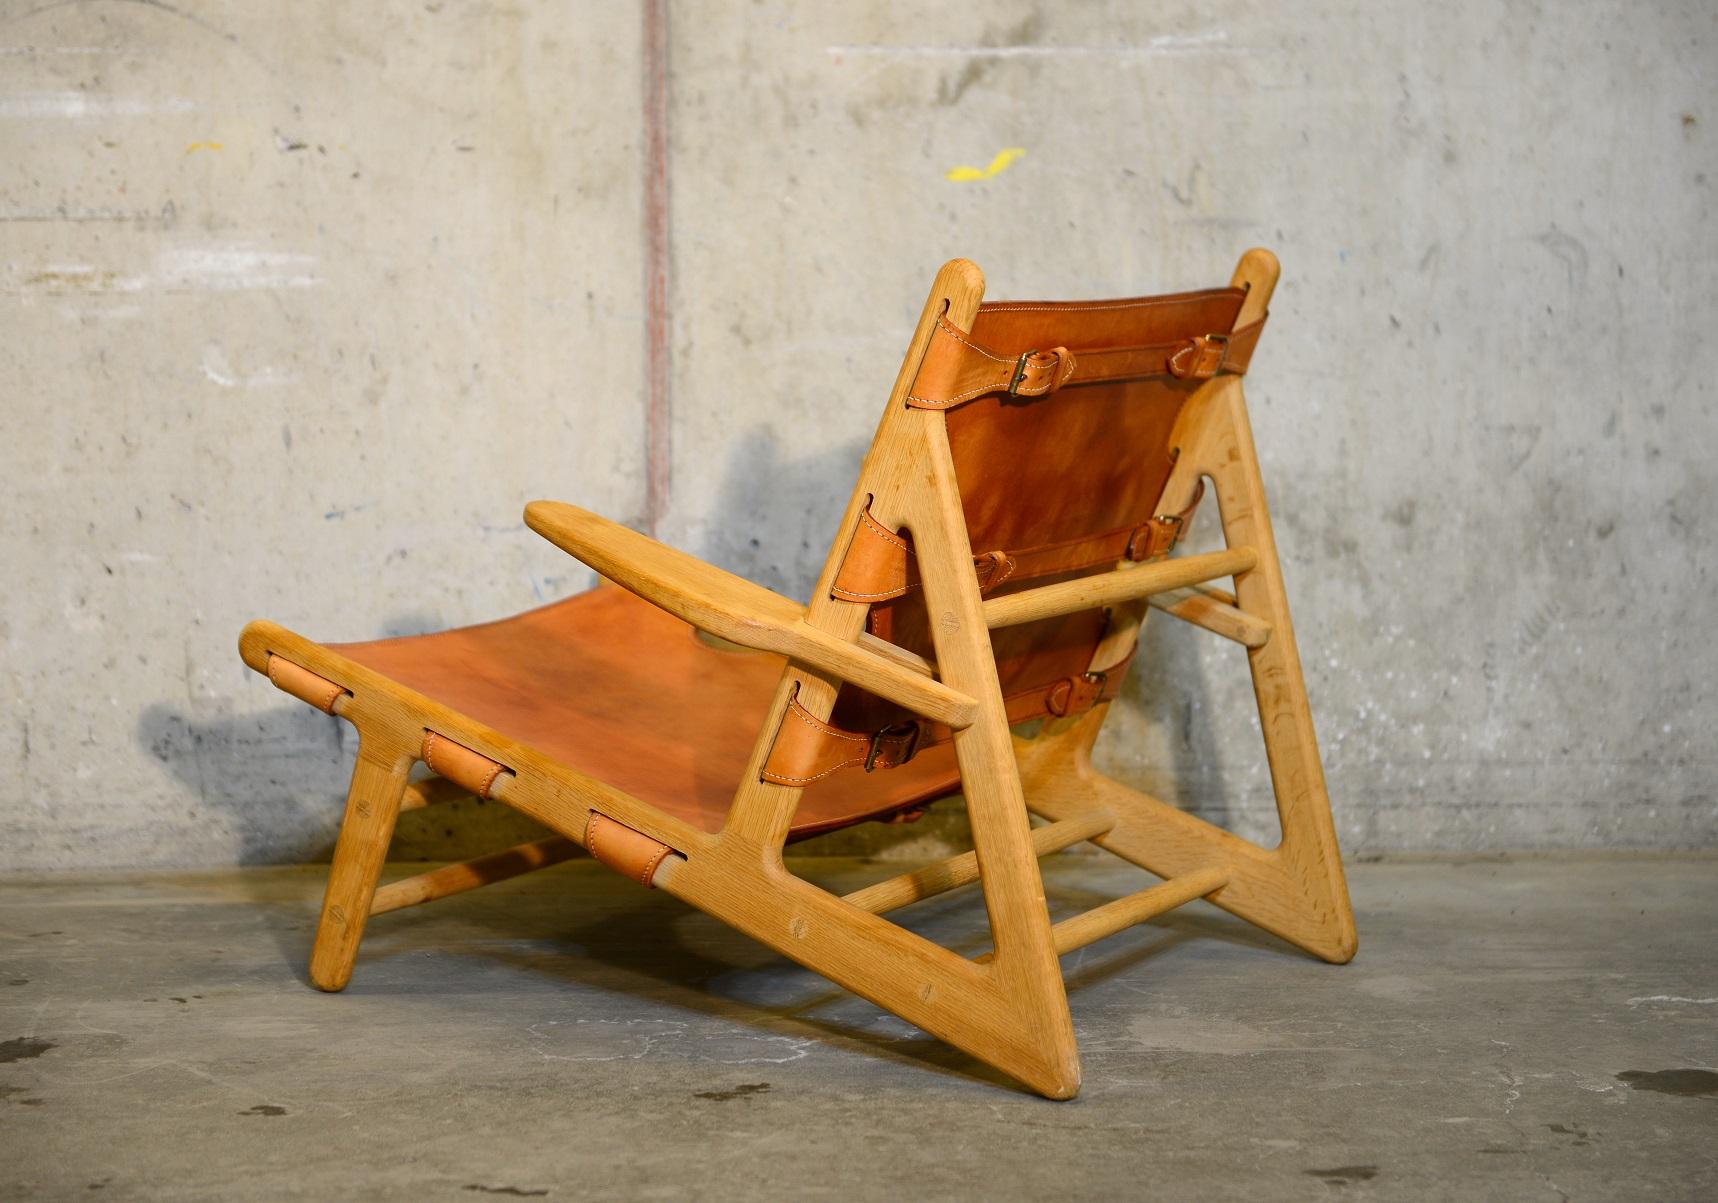 Untreated oak frame and cognac harness leather covers. Produced by Fredericia Furniture in Denmark in 2014. Designed by Danish Børge Mogensen in 1950. Craftsmanship , design and quality oak and leather in an iconic combination. Scandinavian modern /